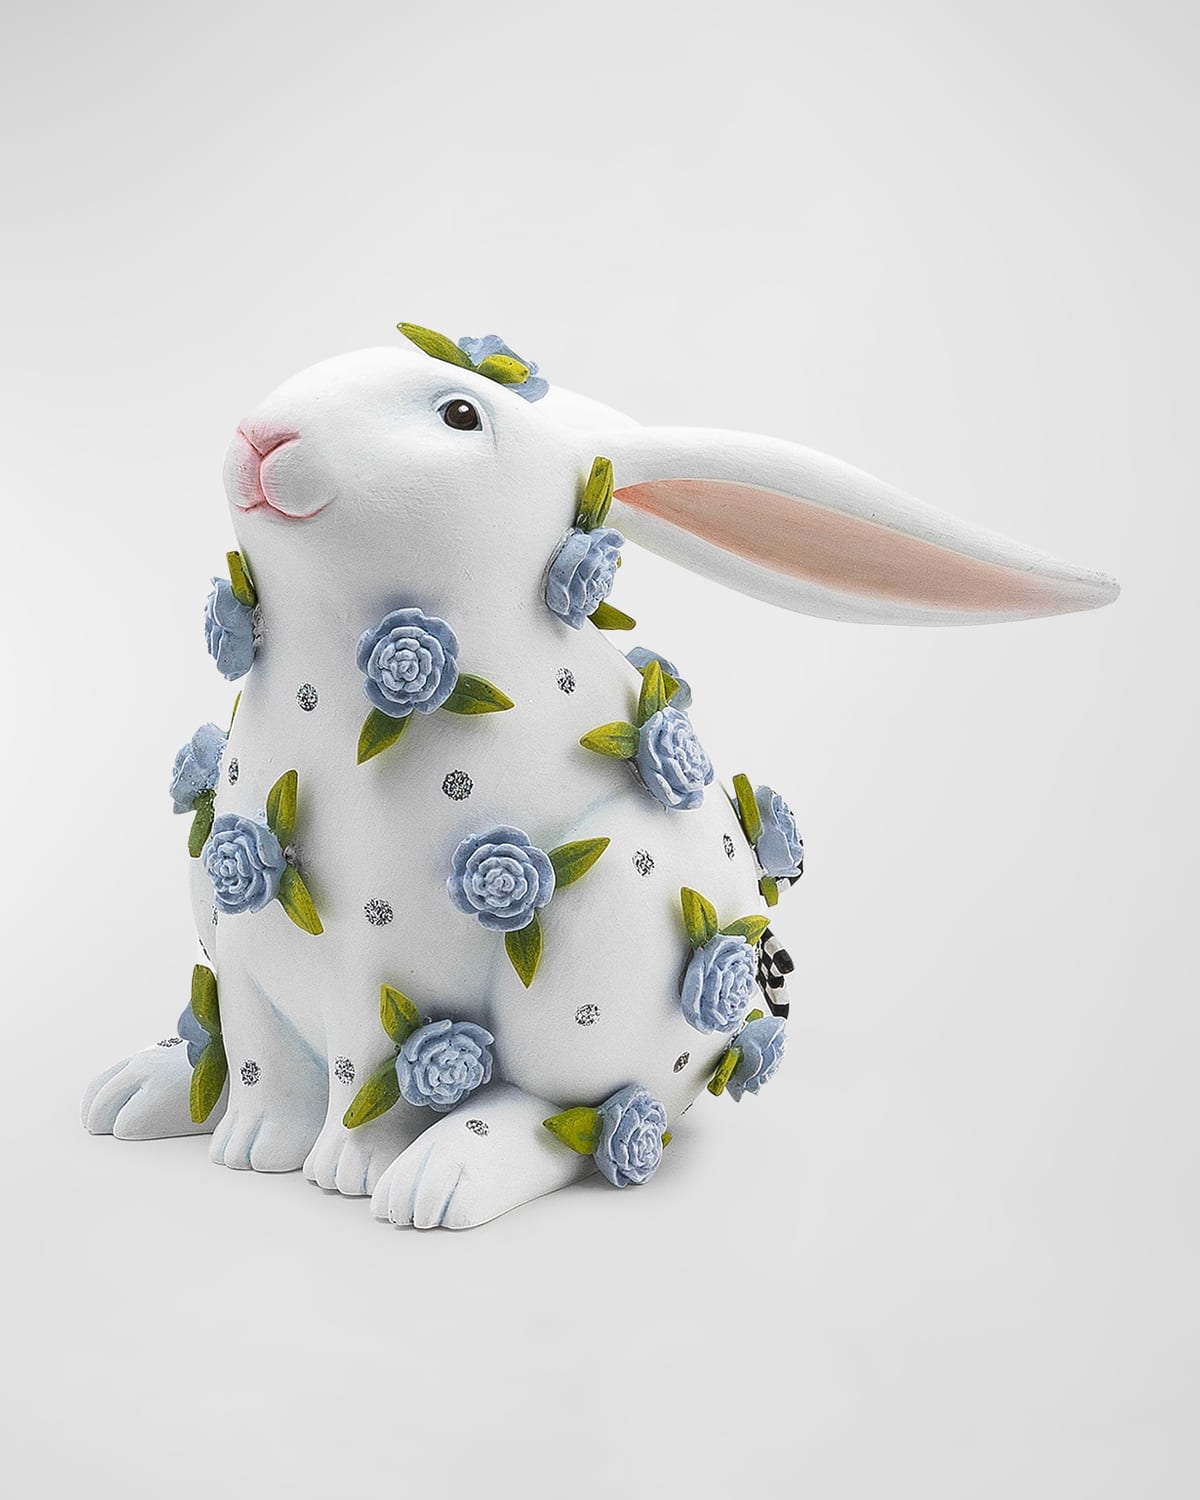 Patience Brewster Periwinkle Peony Sitting Rabbit Figure In White